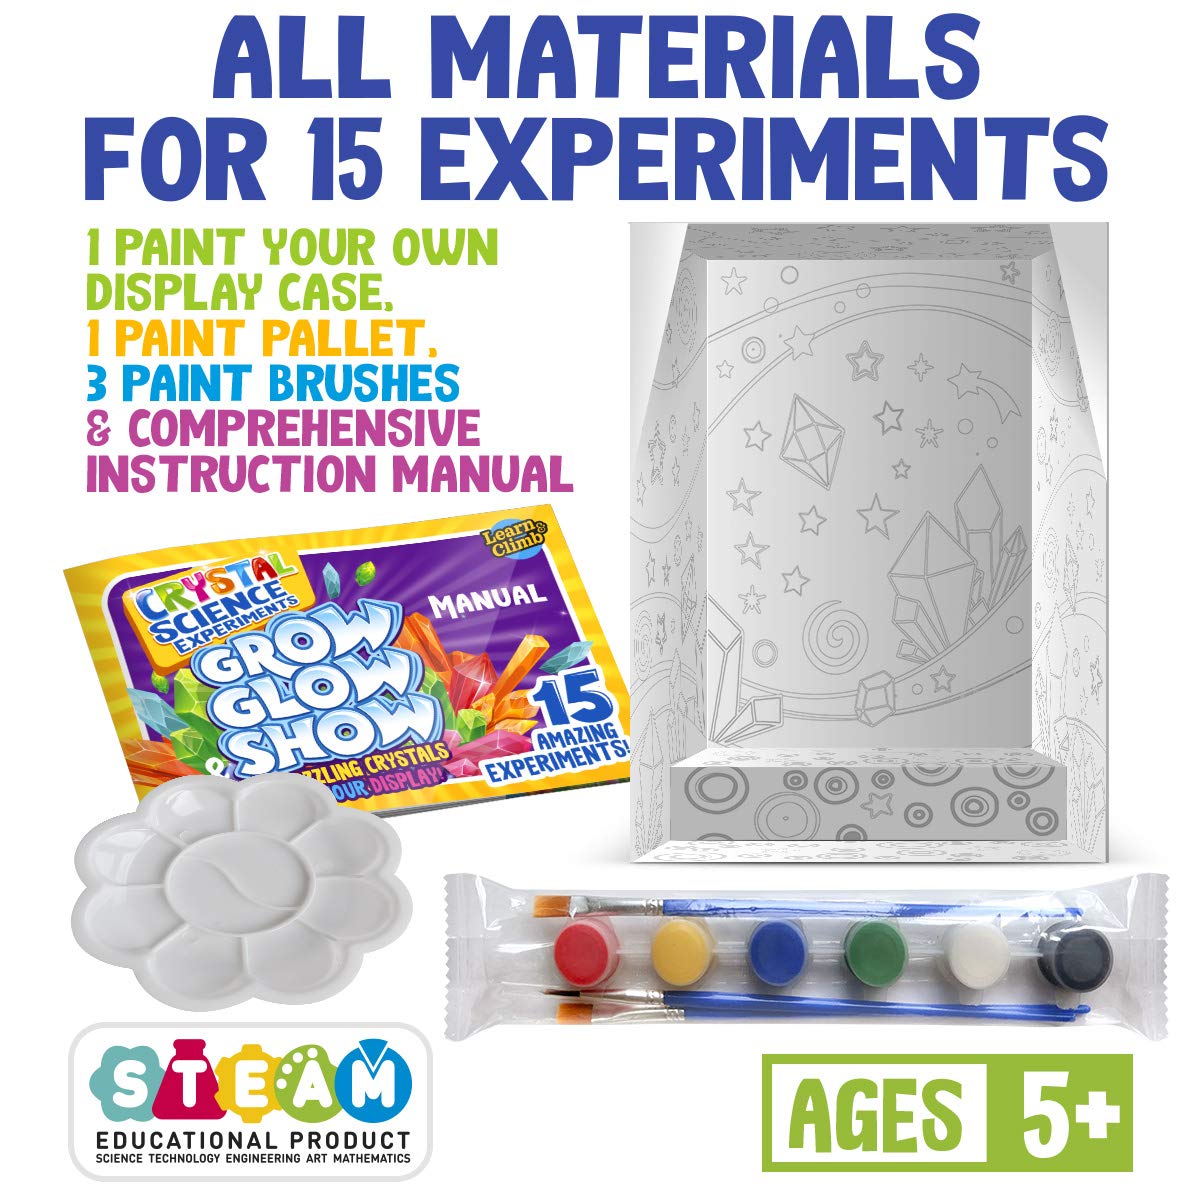 Crystal Growing kit for Kids. Science Experiment Kit - 10 Crystals! Great Crafts Gift for Girls and Boys Ages 6,7,8,9,10